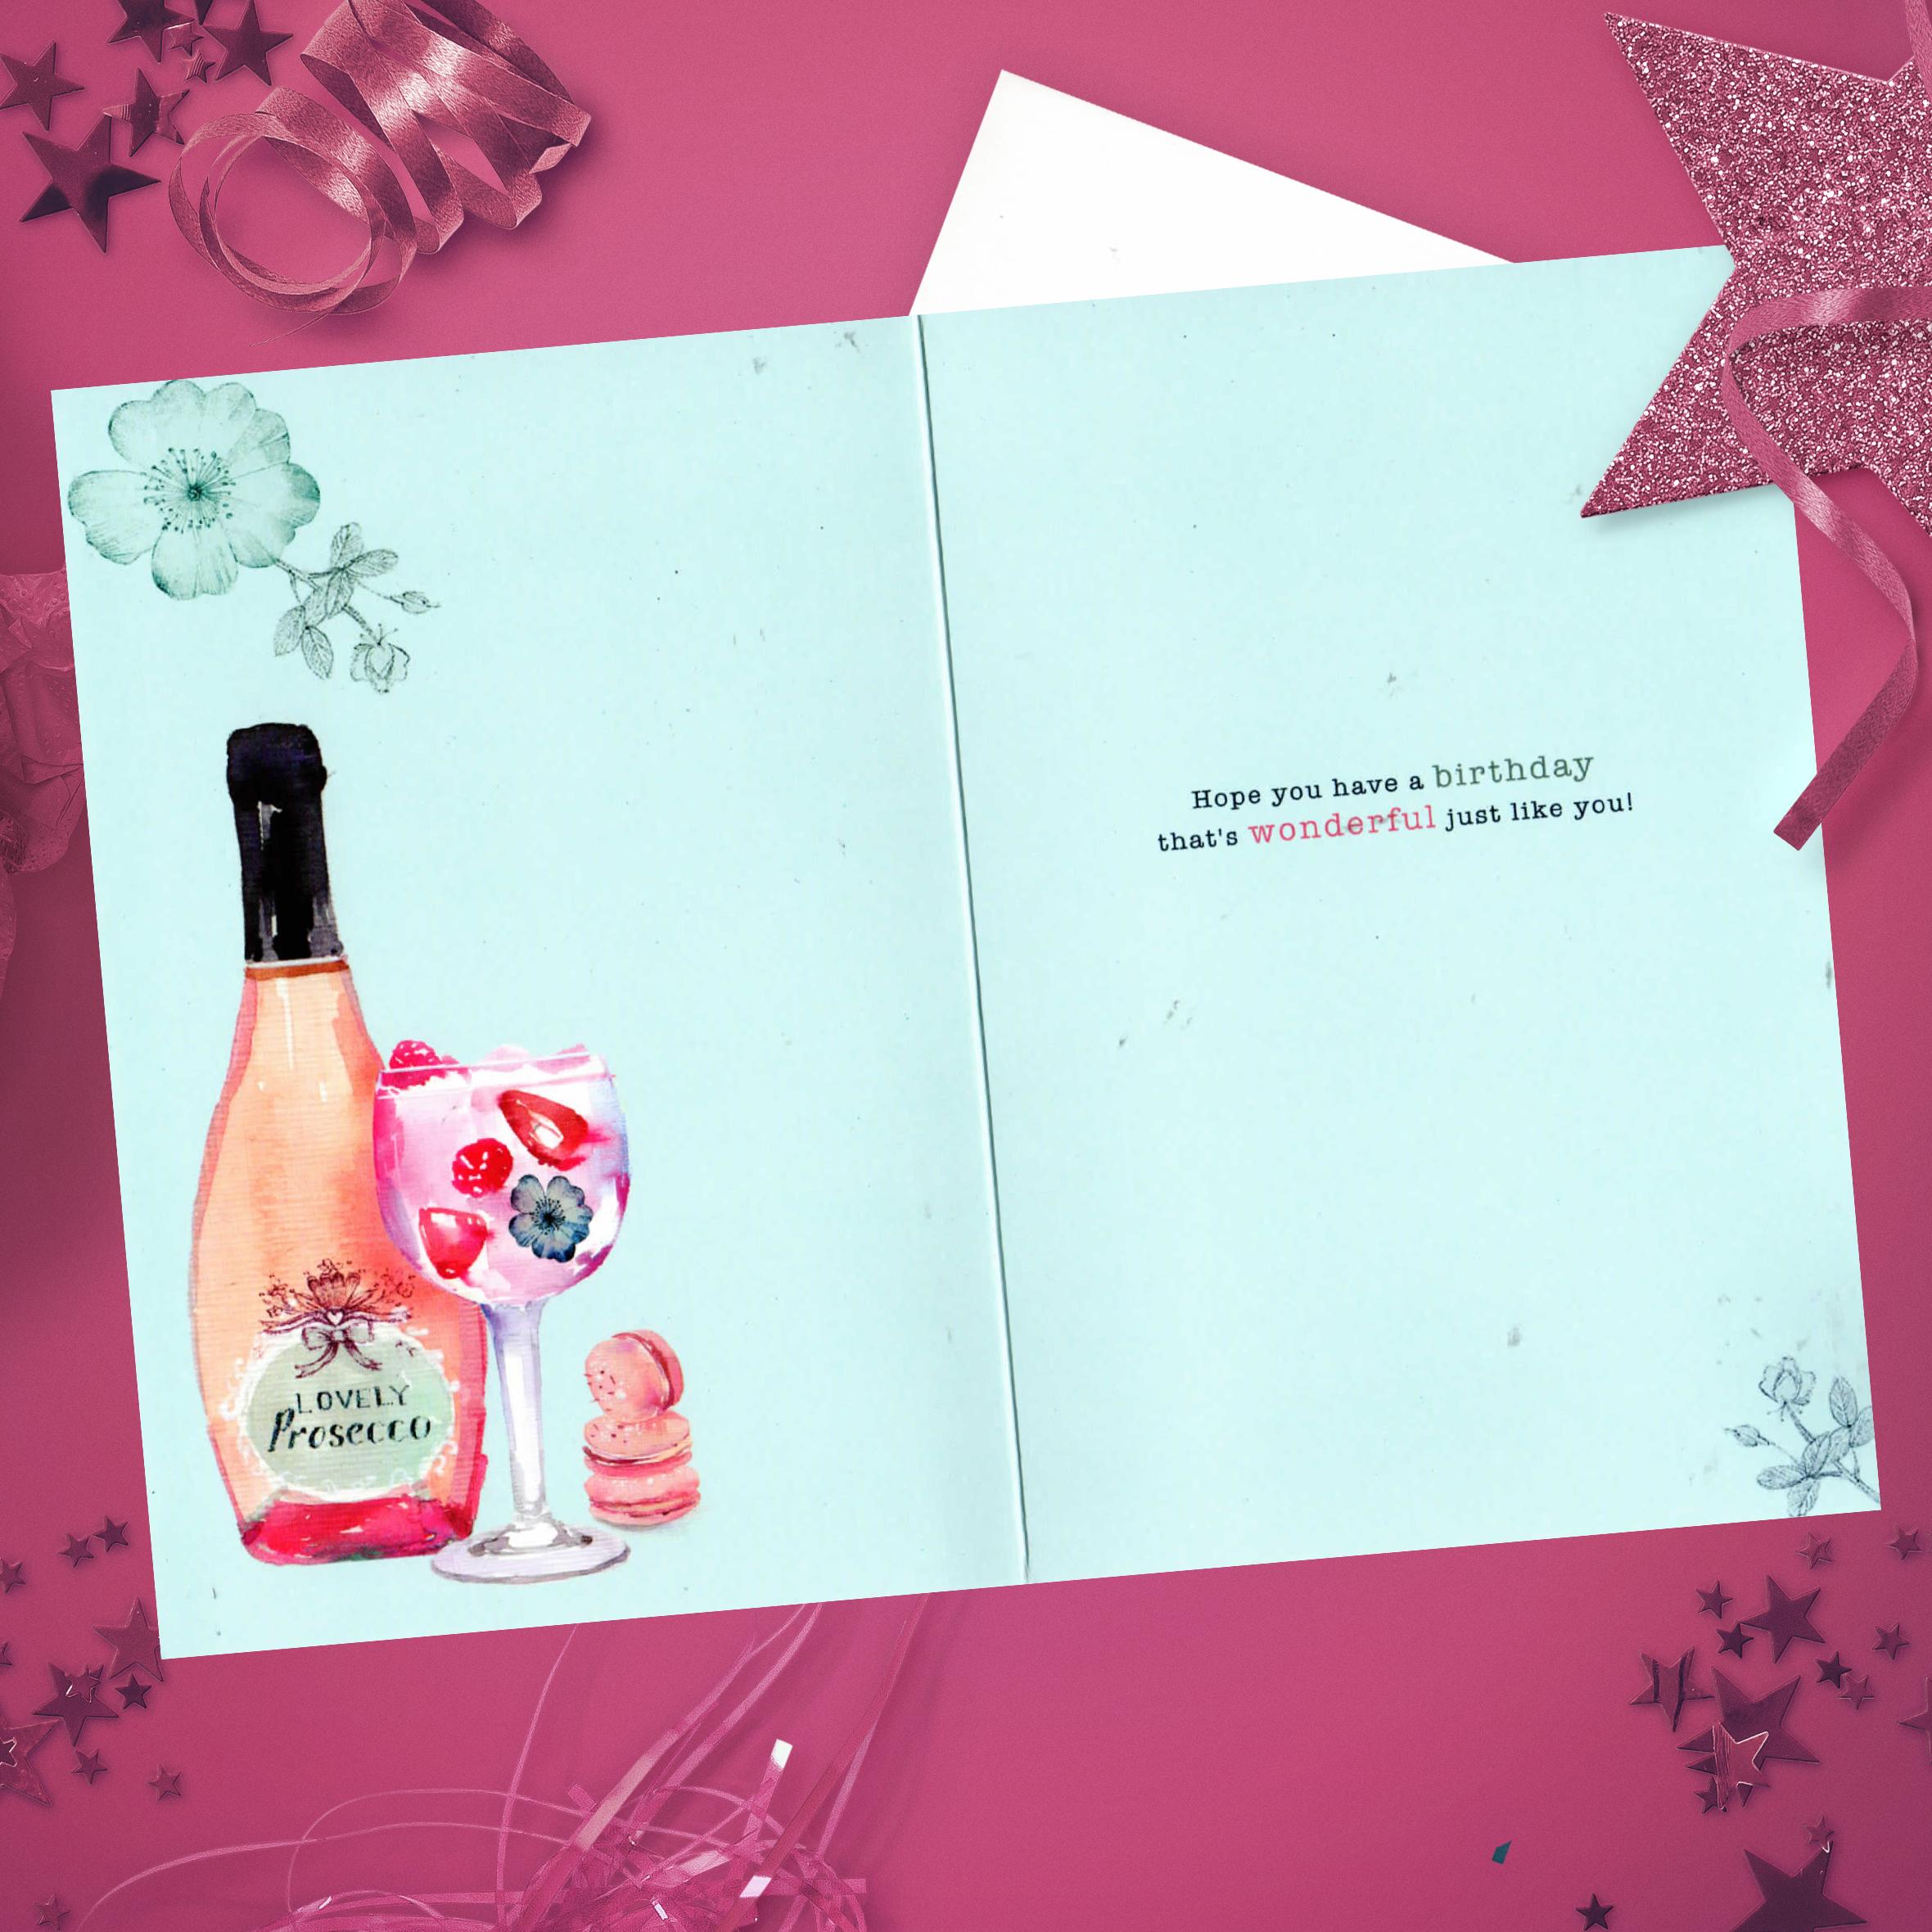 Image Of Inside Of Prosecco Friend Card Showing Layout